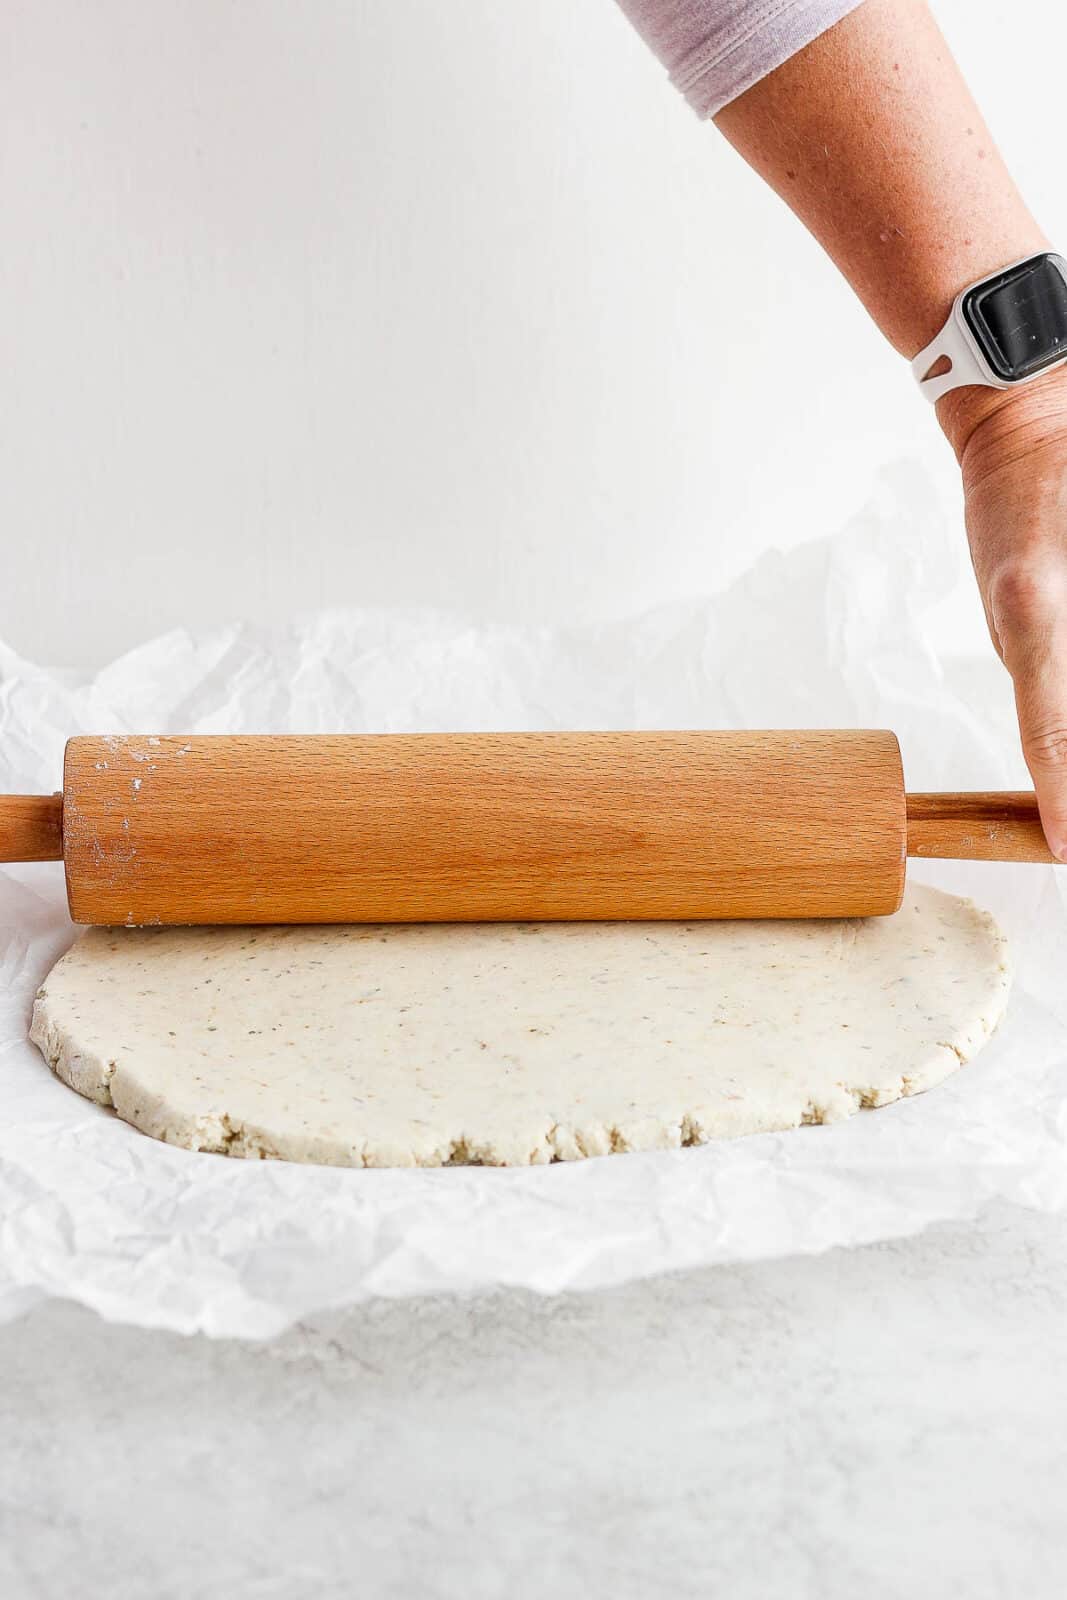 Gluten free biscuit dough being rolled out with a rolling pin.